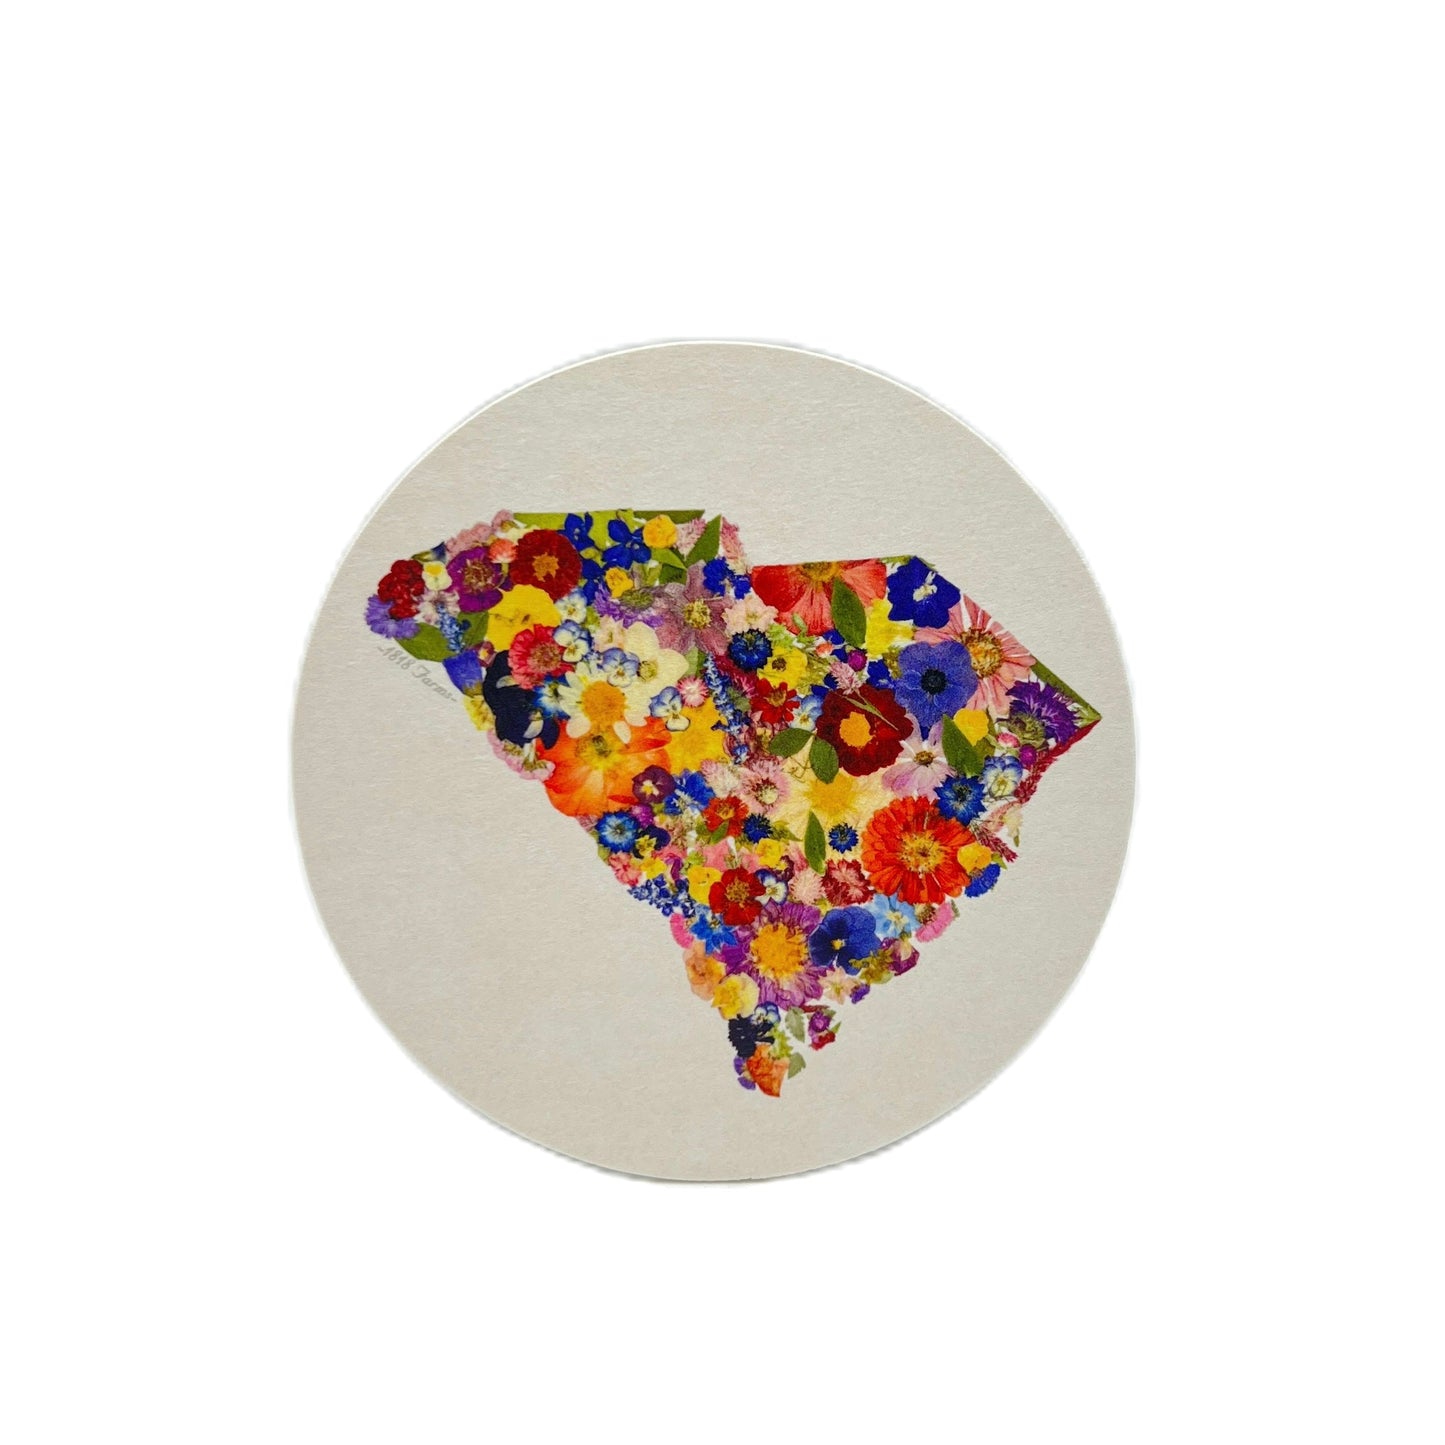 State Themed Drink Coasters (Set of 6)  - "Where I Bloom" Collection Coaster 1818 Farms South Carolina  